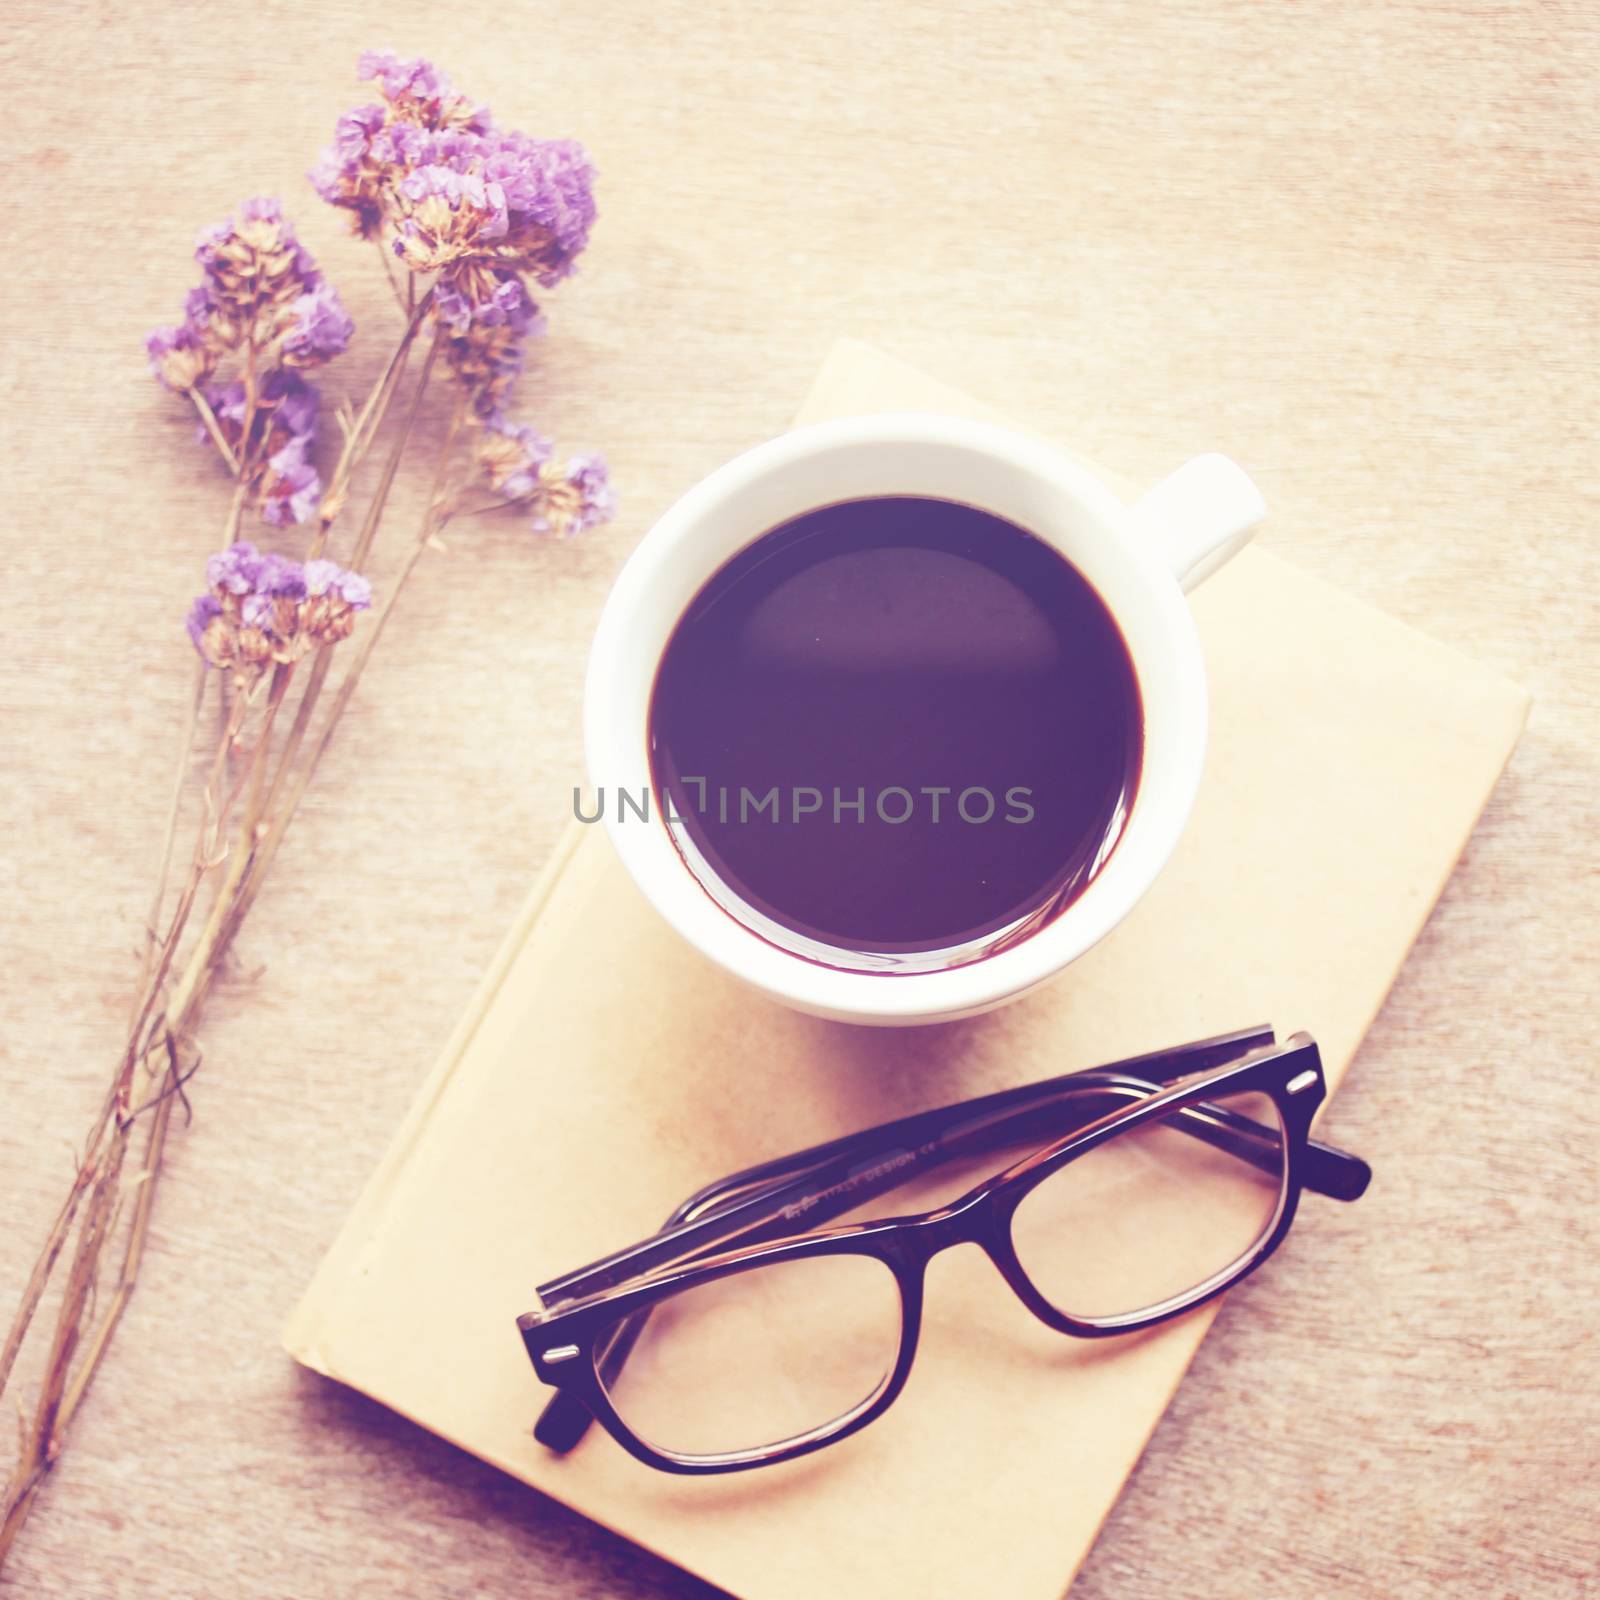 Black coffee on notebook with eyeglasses, retro filter effect by nuchylee